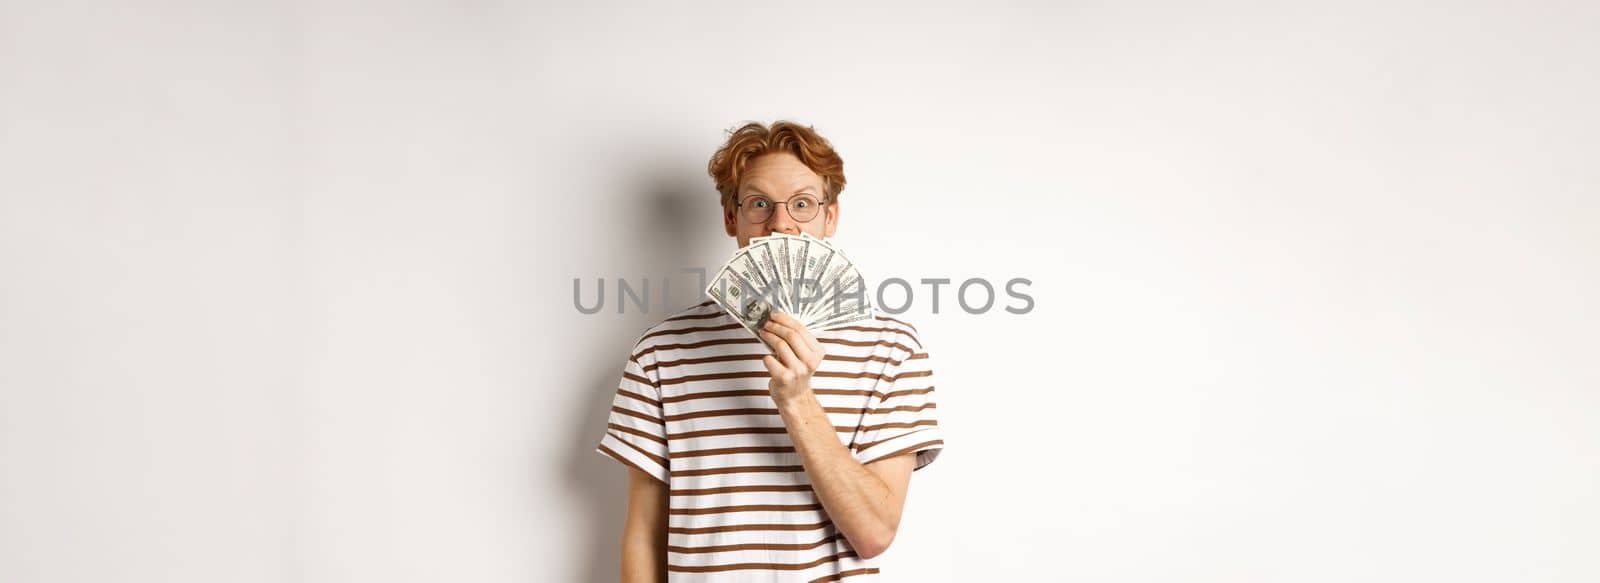 Shopping and finance concept. Lucky redhead guy winning, showing prize money and smiling happy at camera, standing in glasses and t-shirt over white background.